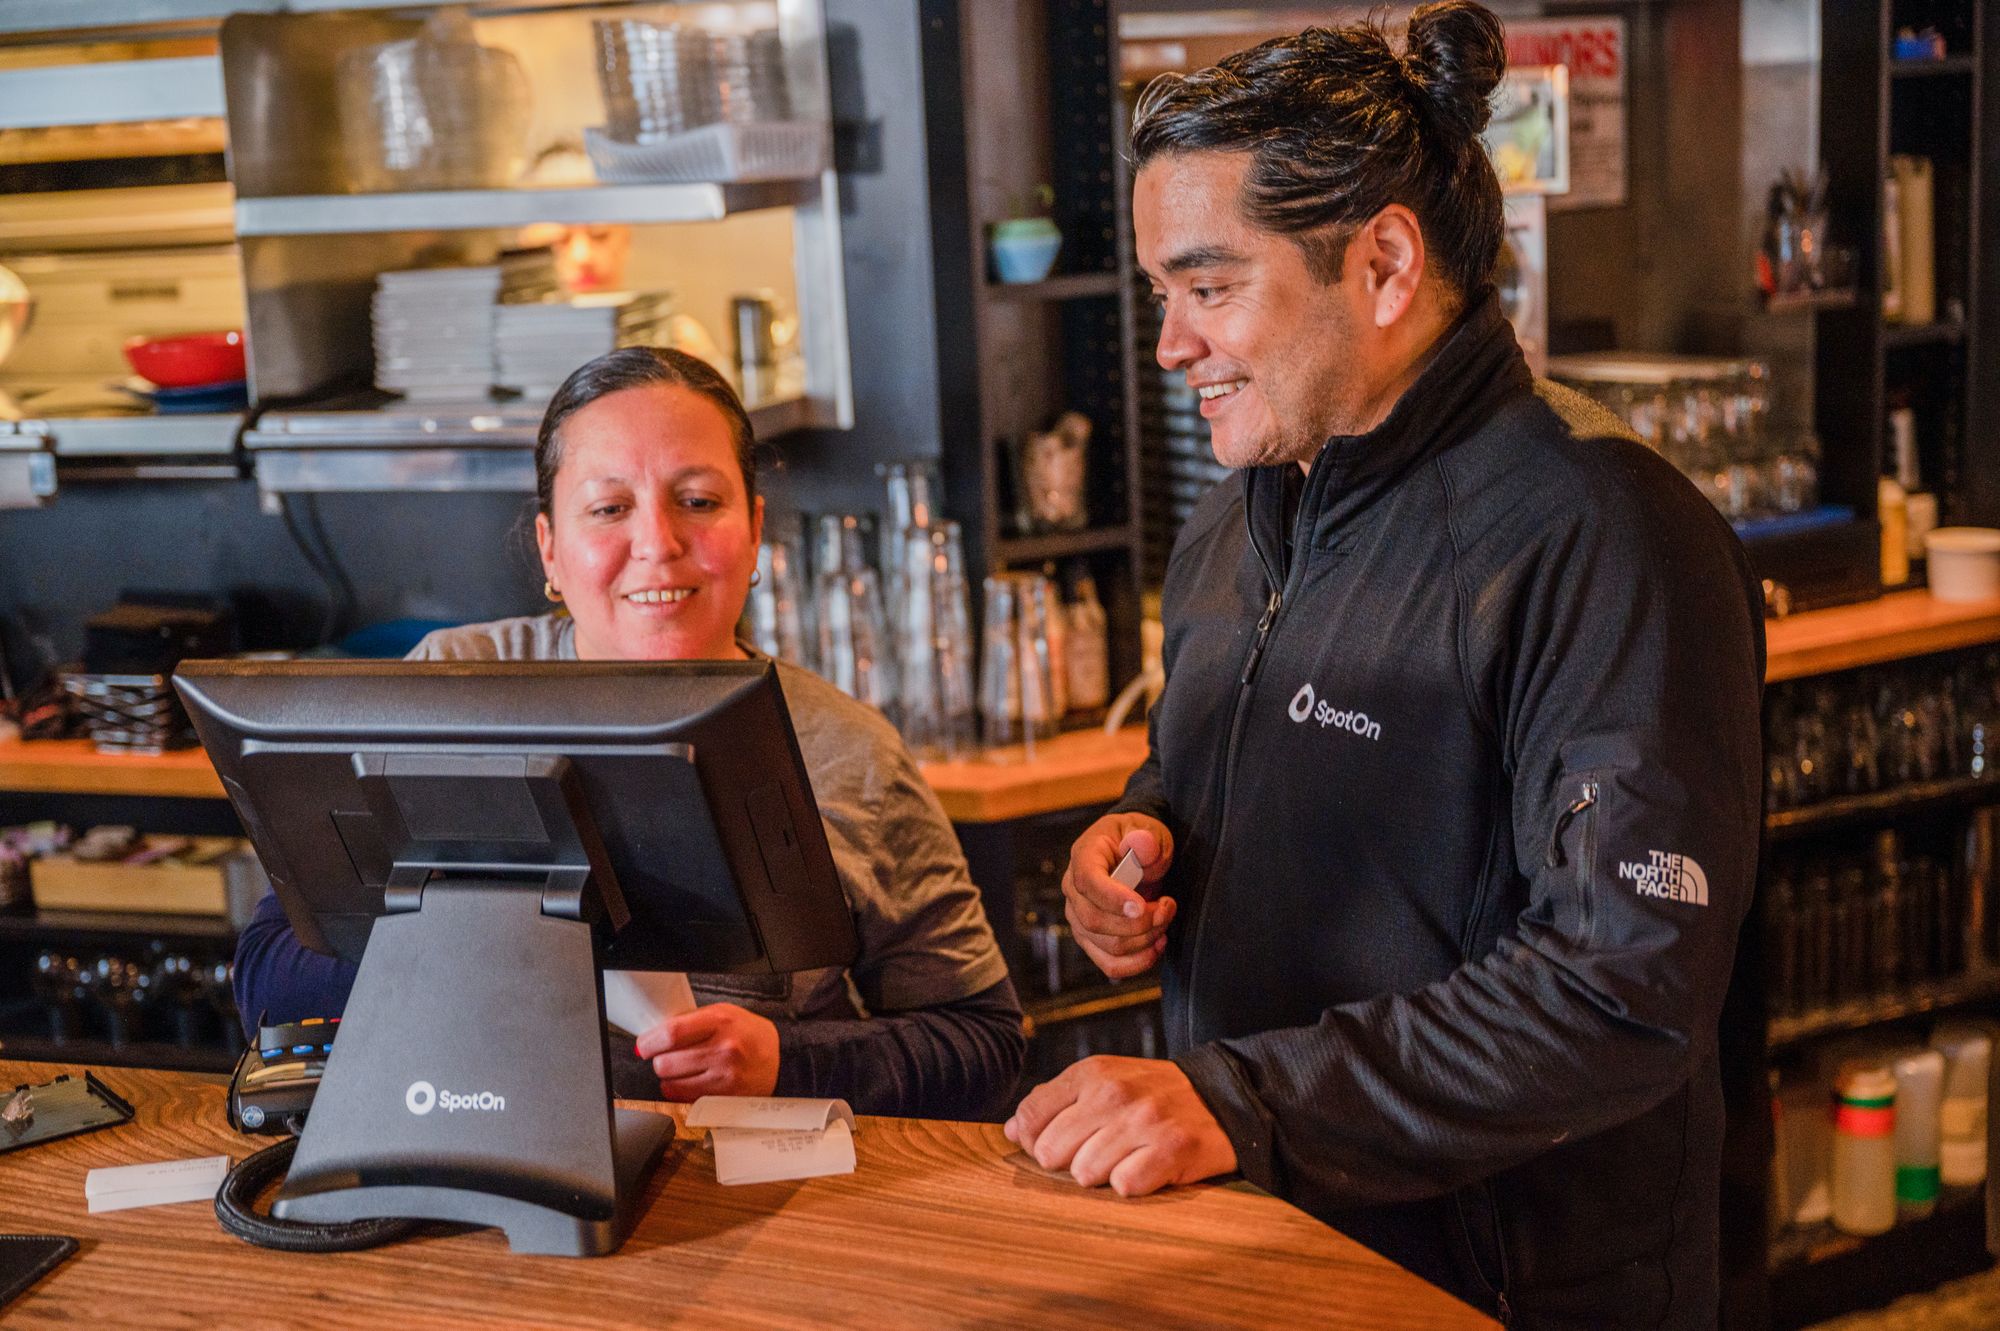 A SpotOn restaurant POS expert helps a restaurant employee learn a new system